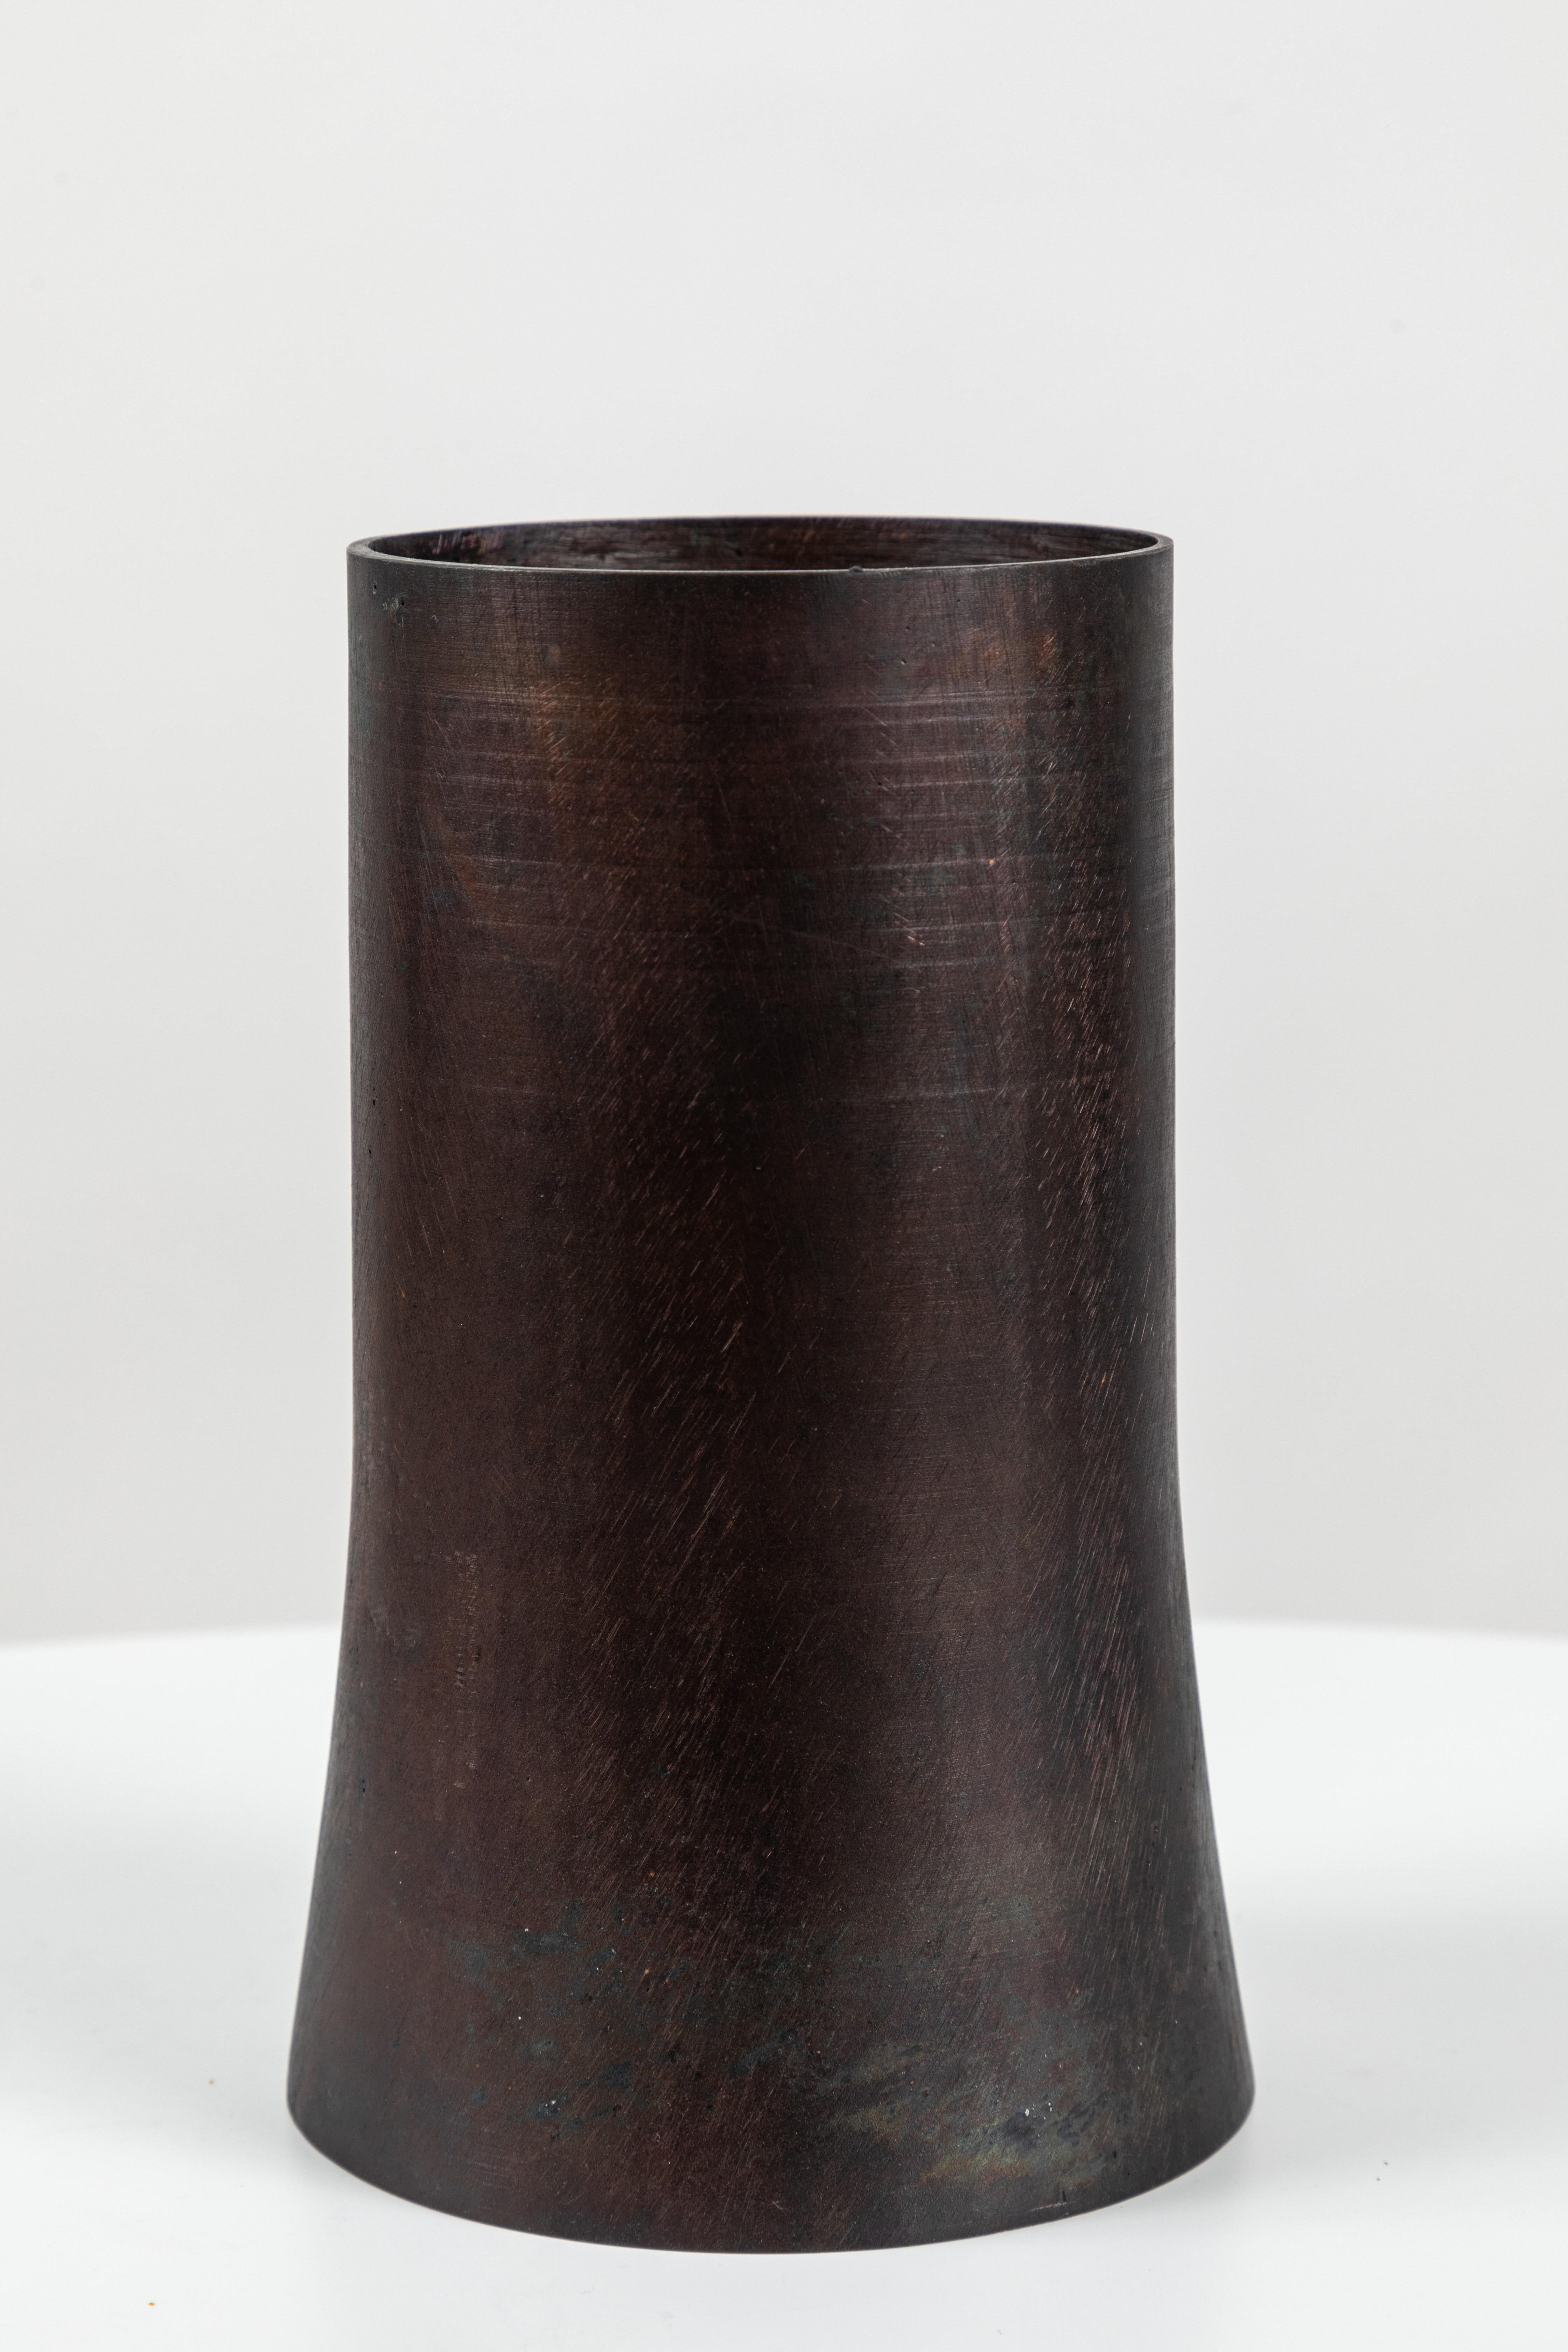 Carl Auböck Model #3854 'Atom 2' brass vase. Designed in the 1950s, this incredibly refined and sculptural Viennese vase is executed in darkly patinated brass by Werkstätte Carl Auböck, Austria. 

Price is per item. Two in stock. Available in